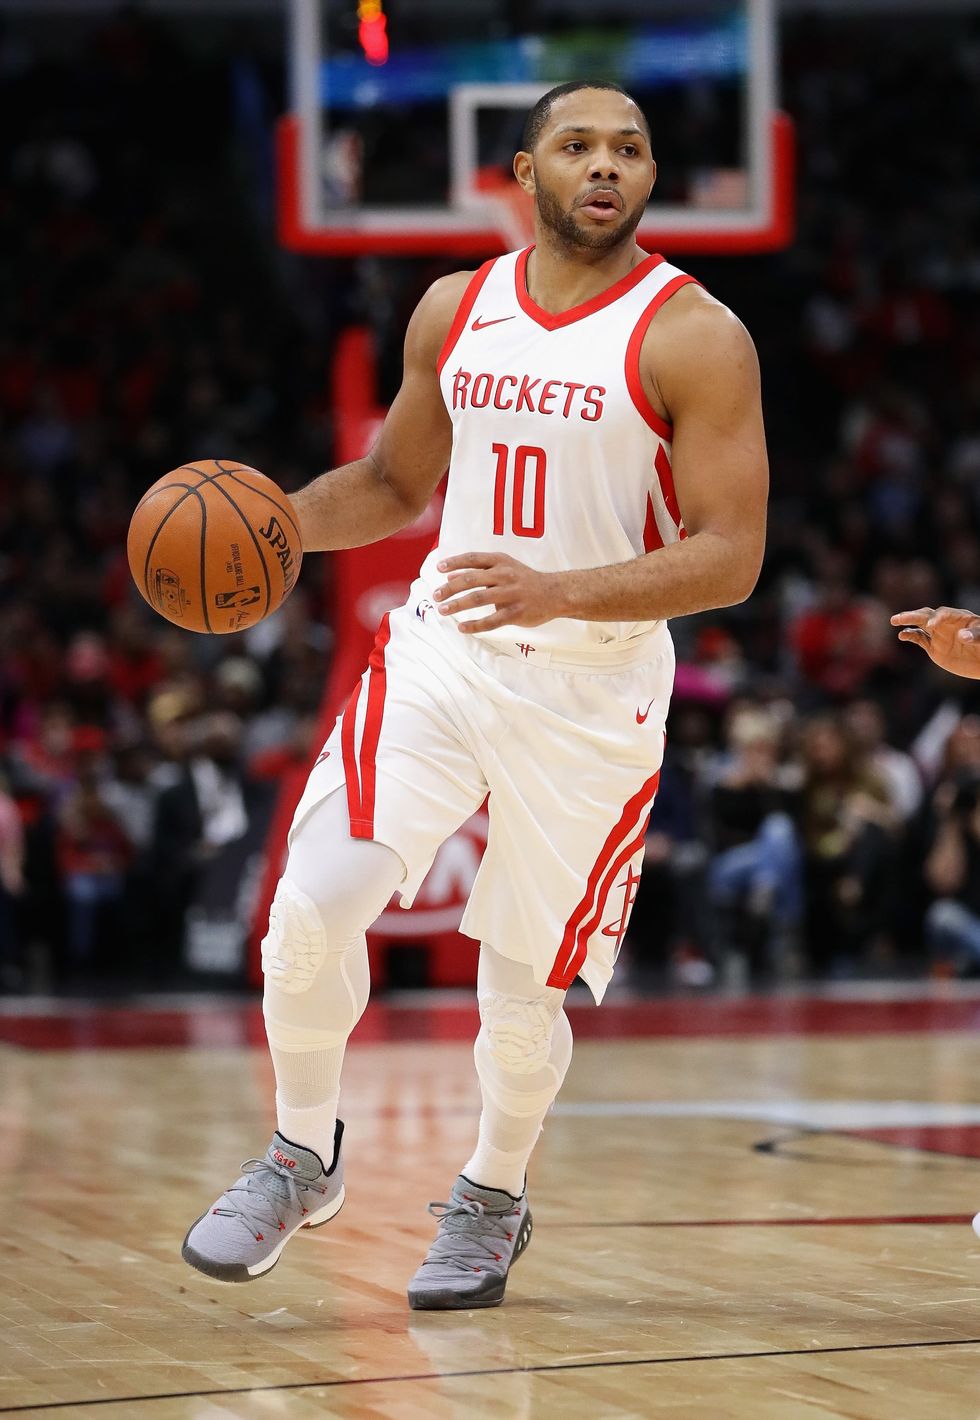 Joel Blank: Rockets need to pick up the pace, tweak the lineup